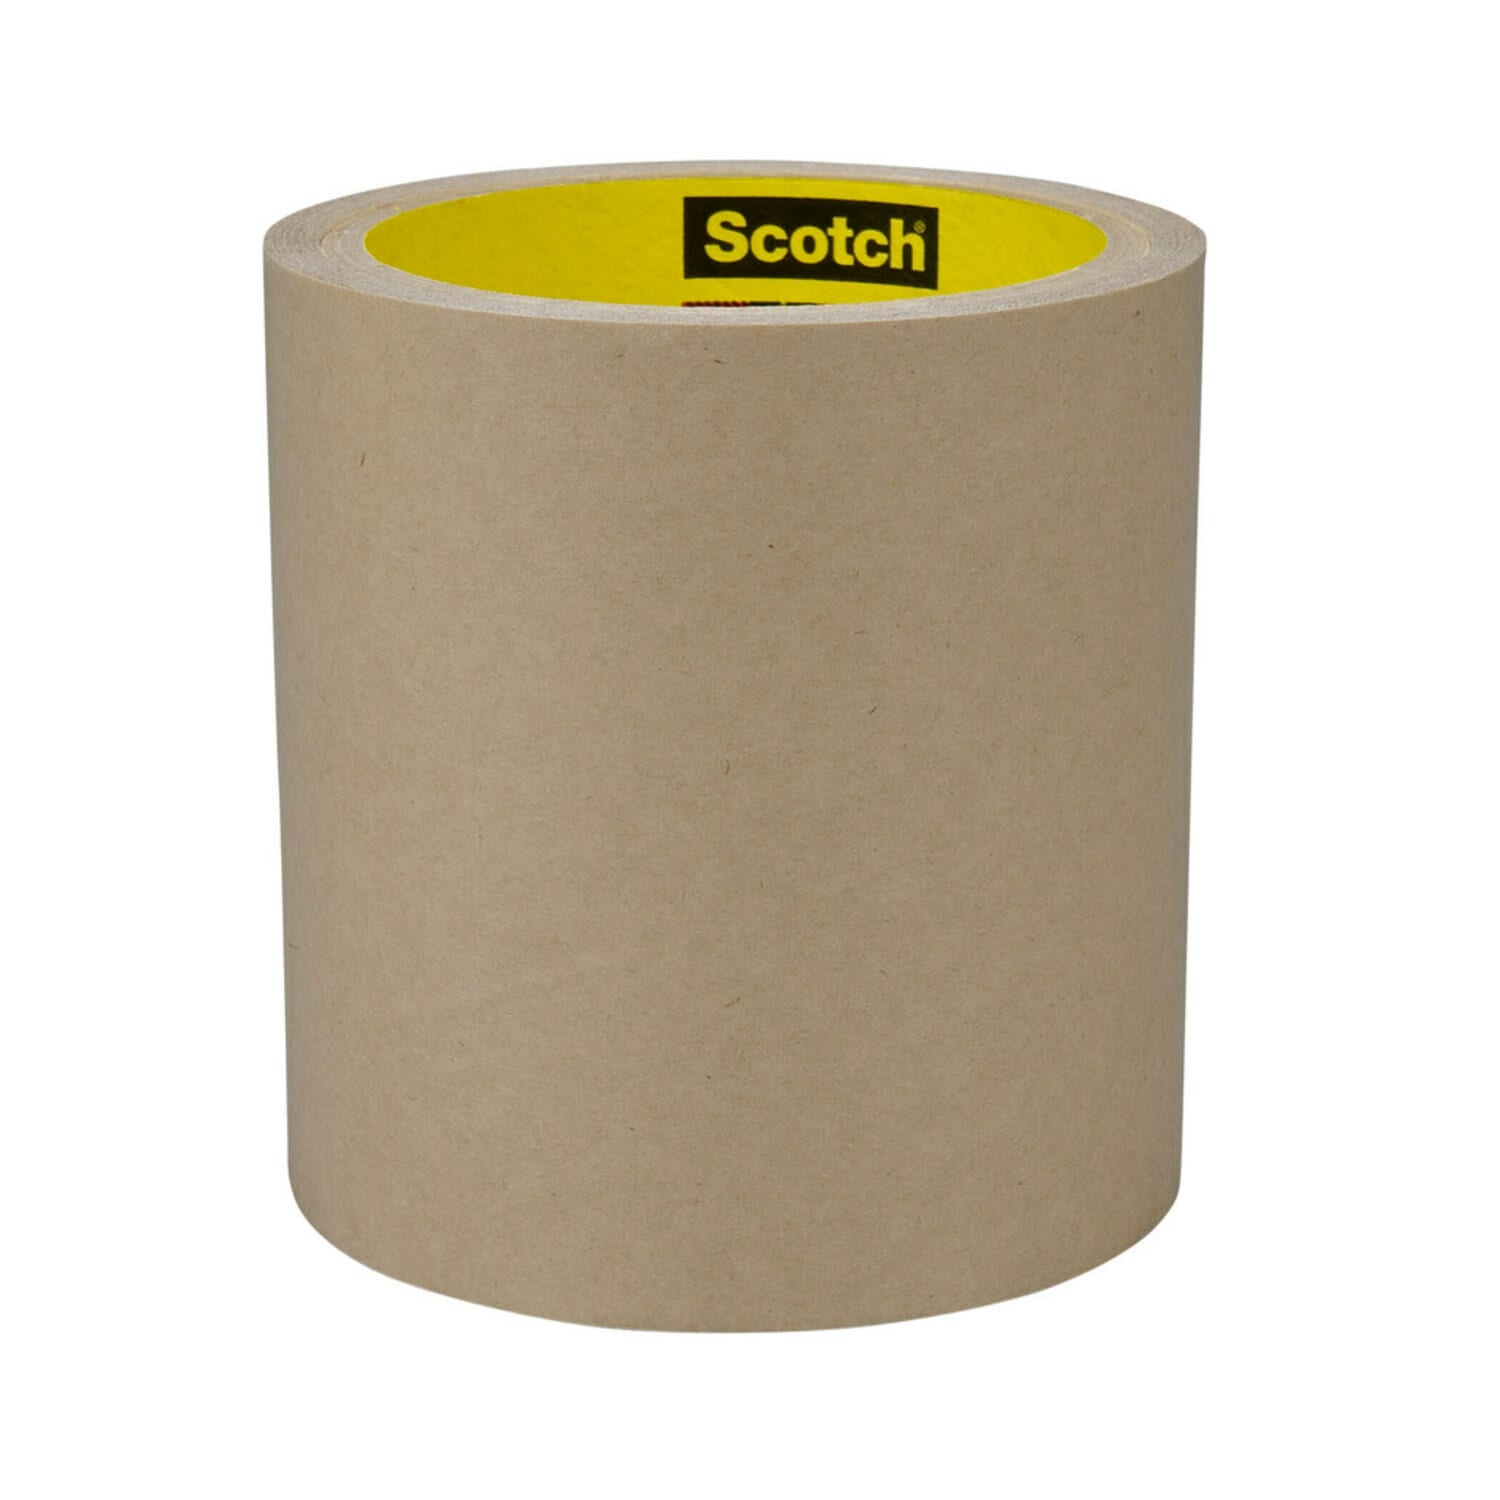 7010372398 - 3M Adhesive Transfer Tape 9482PC, Clear, 1/2 in x 60 yd, 2 mil, 72
rolls per case